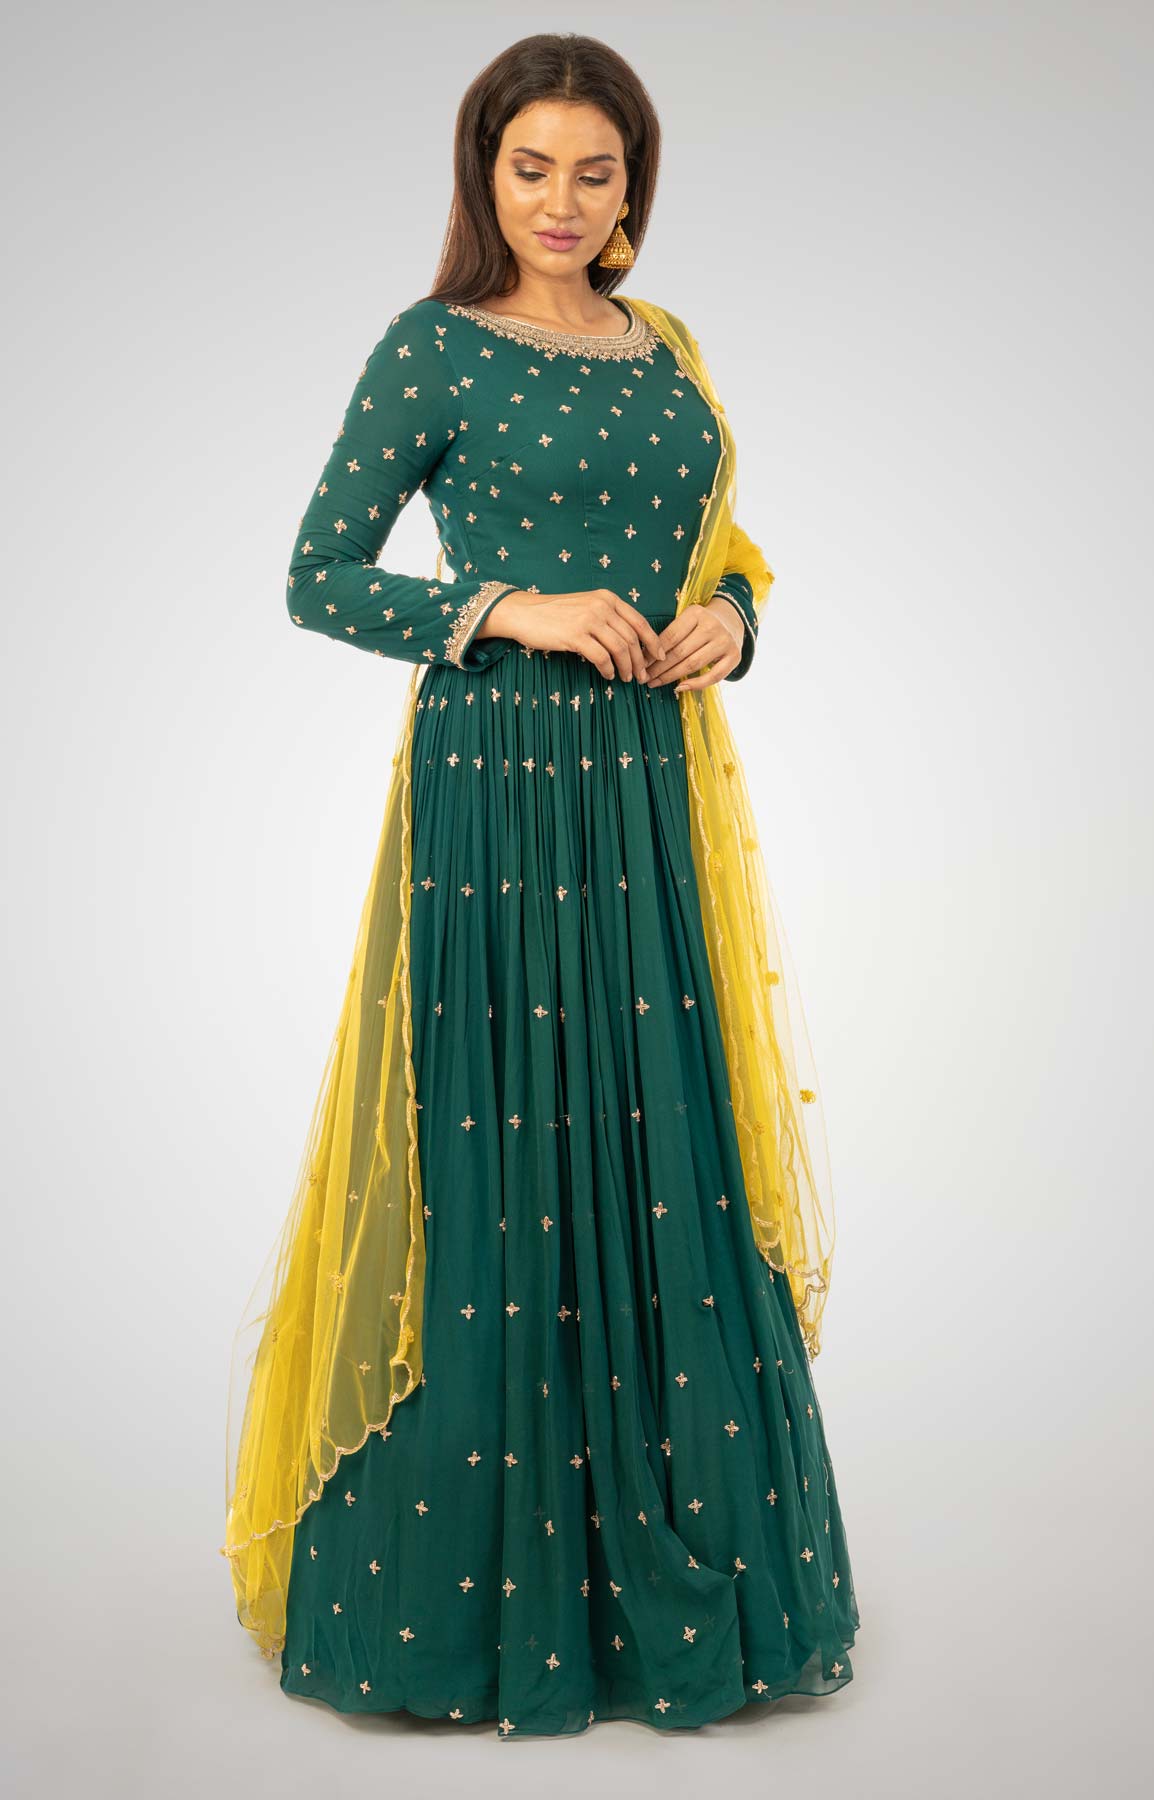 Bottle Green Anarkali Suit With Butti Work Paired With Contrasting Yellow Dupatta – Viraaya By Ushnakmals